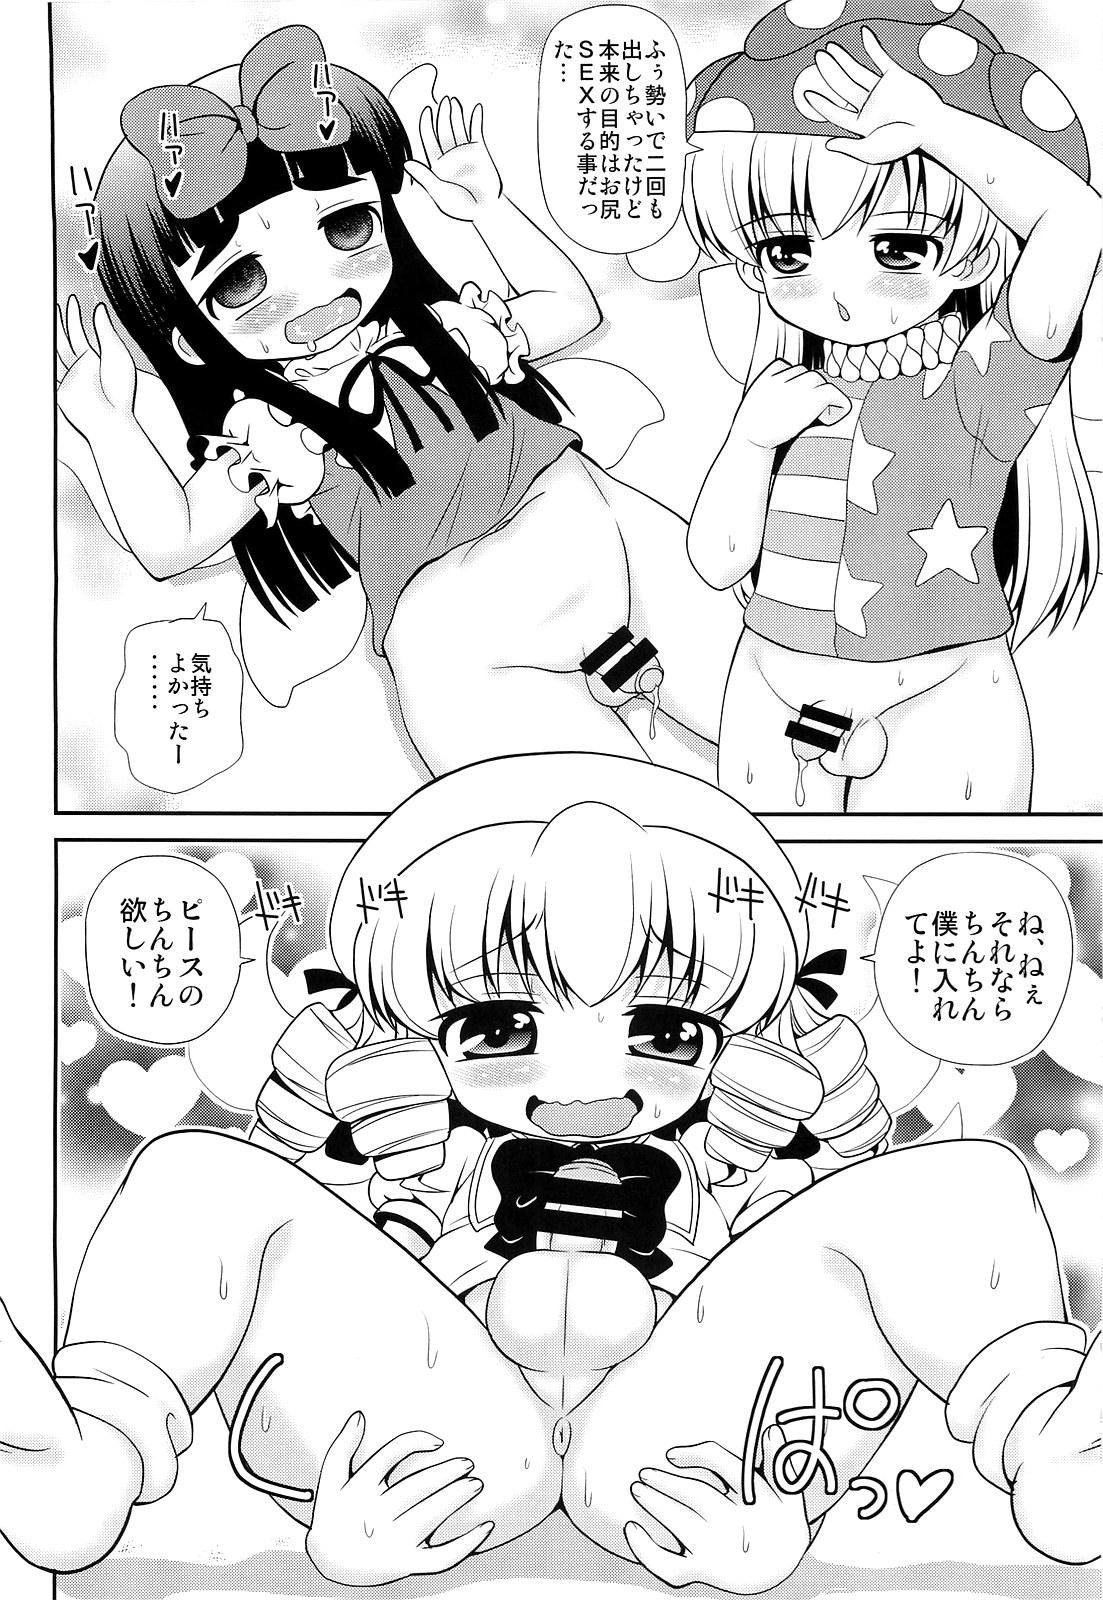 Fucking Quad Ejaculation - Touhou project Russia - Page 12